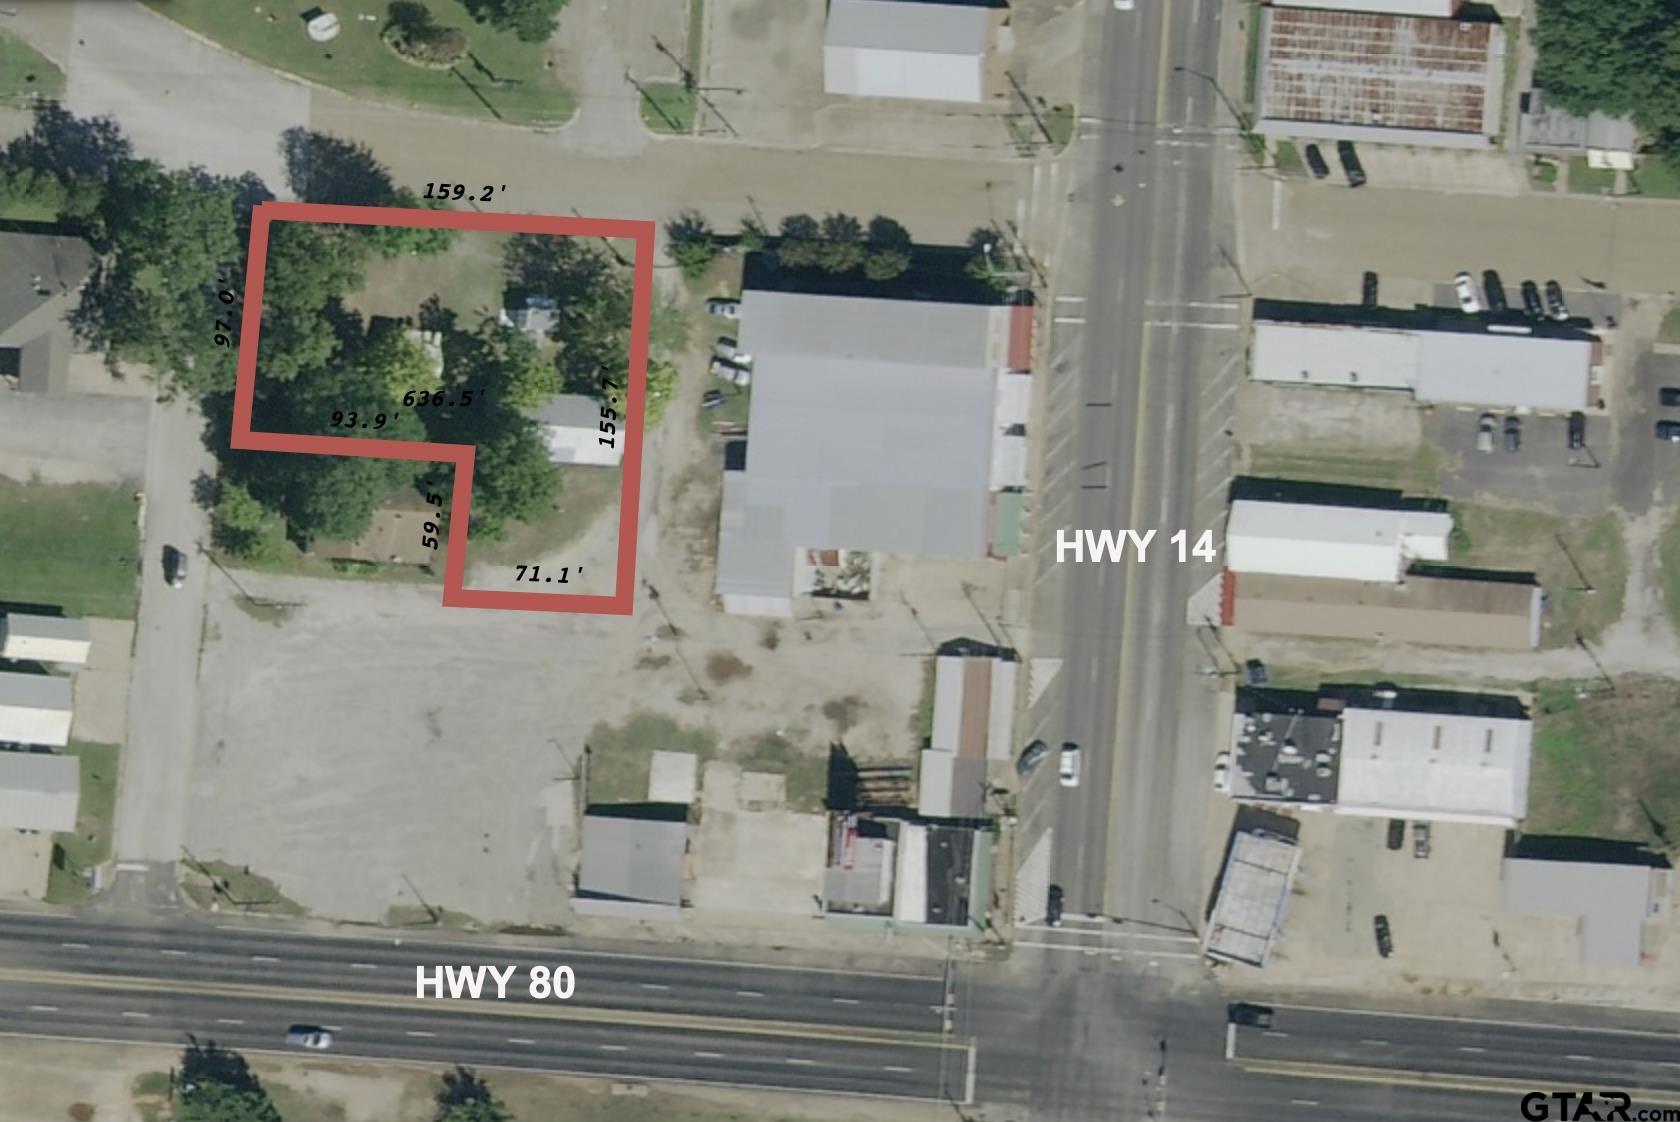 GREAT INVESTMENT OPPORTUNITY!! Great location to start ANY type of business. Right in the heart of Hawkins & across form the city park. Just one block off of Highway 80 & Highway 14. Great visibility to Highway 80 traffic. Apx 1/2 acre, city utilities with multiple electric & water hook-ups, natural gas & high speed internet available too! Come build a duplex, house, restaurant, office-space, self storage buildings, car wash, repair shop or retail. The possibilities are endless, so don't miss out on this opportunity!! Come take a look!